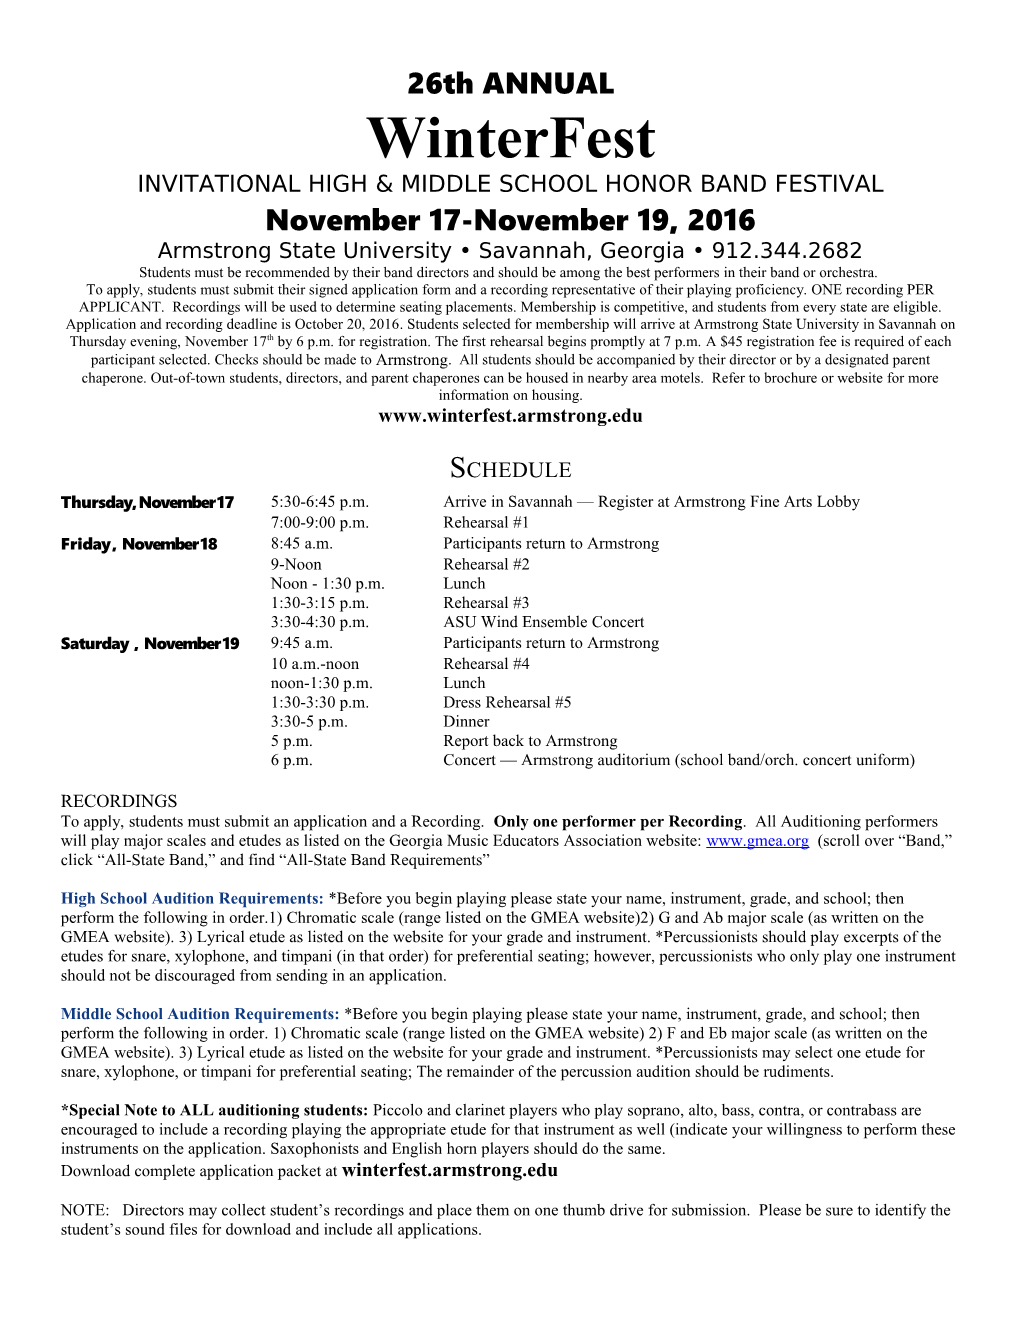 Invitational High & Middle School Honor Band Festival